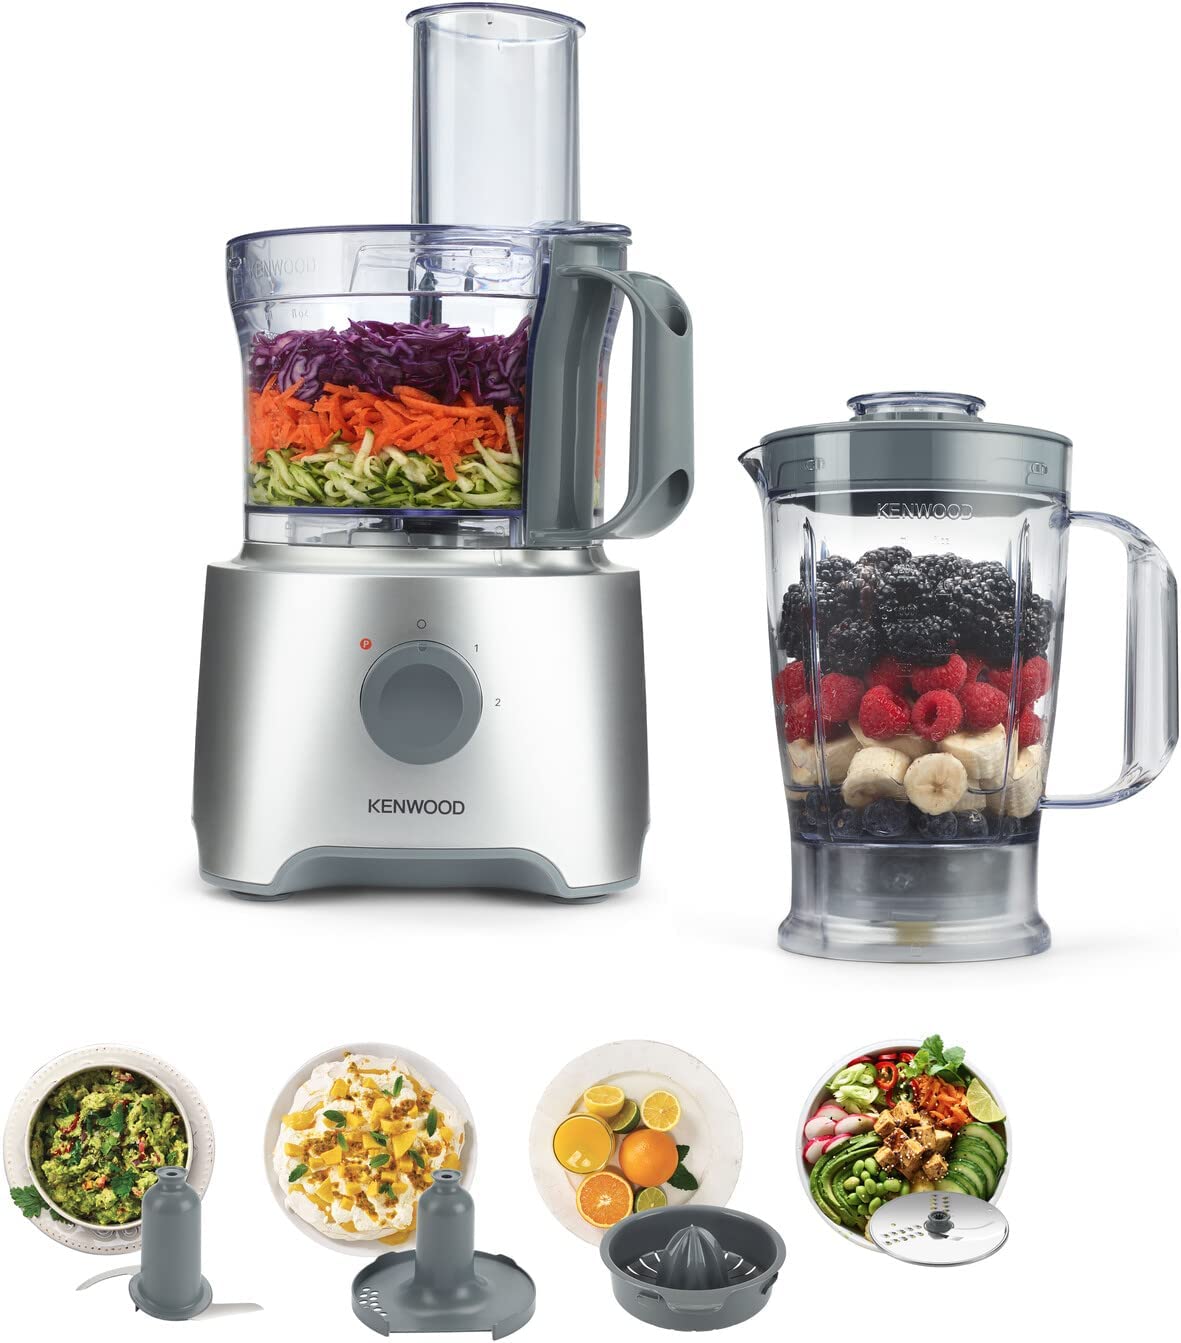 Kenwood fdp302si Multipro Compact Food Processor 800 W 2.1 Litres Silver